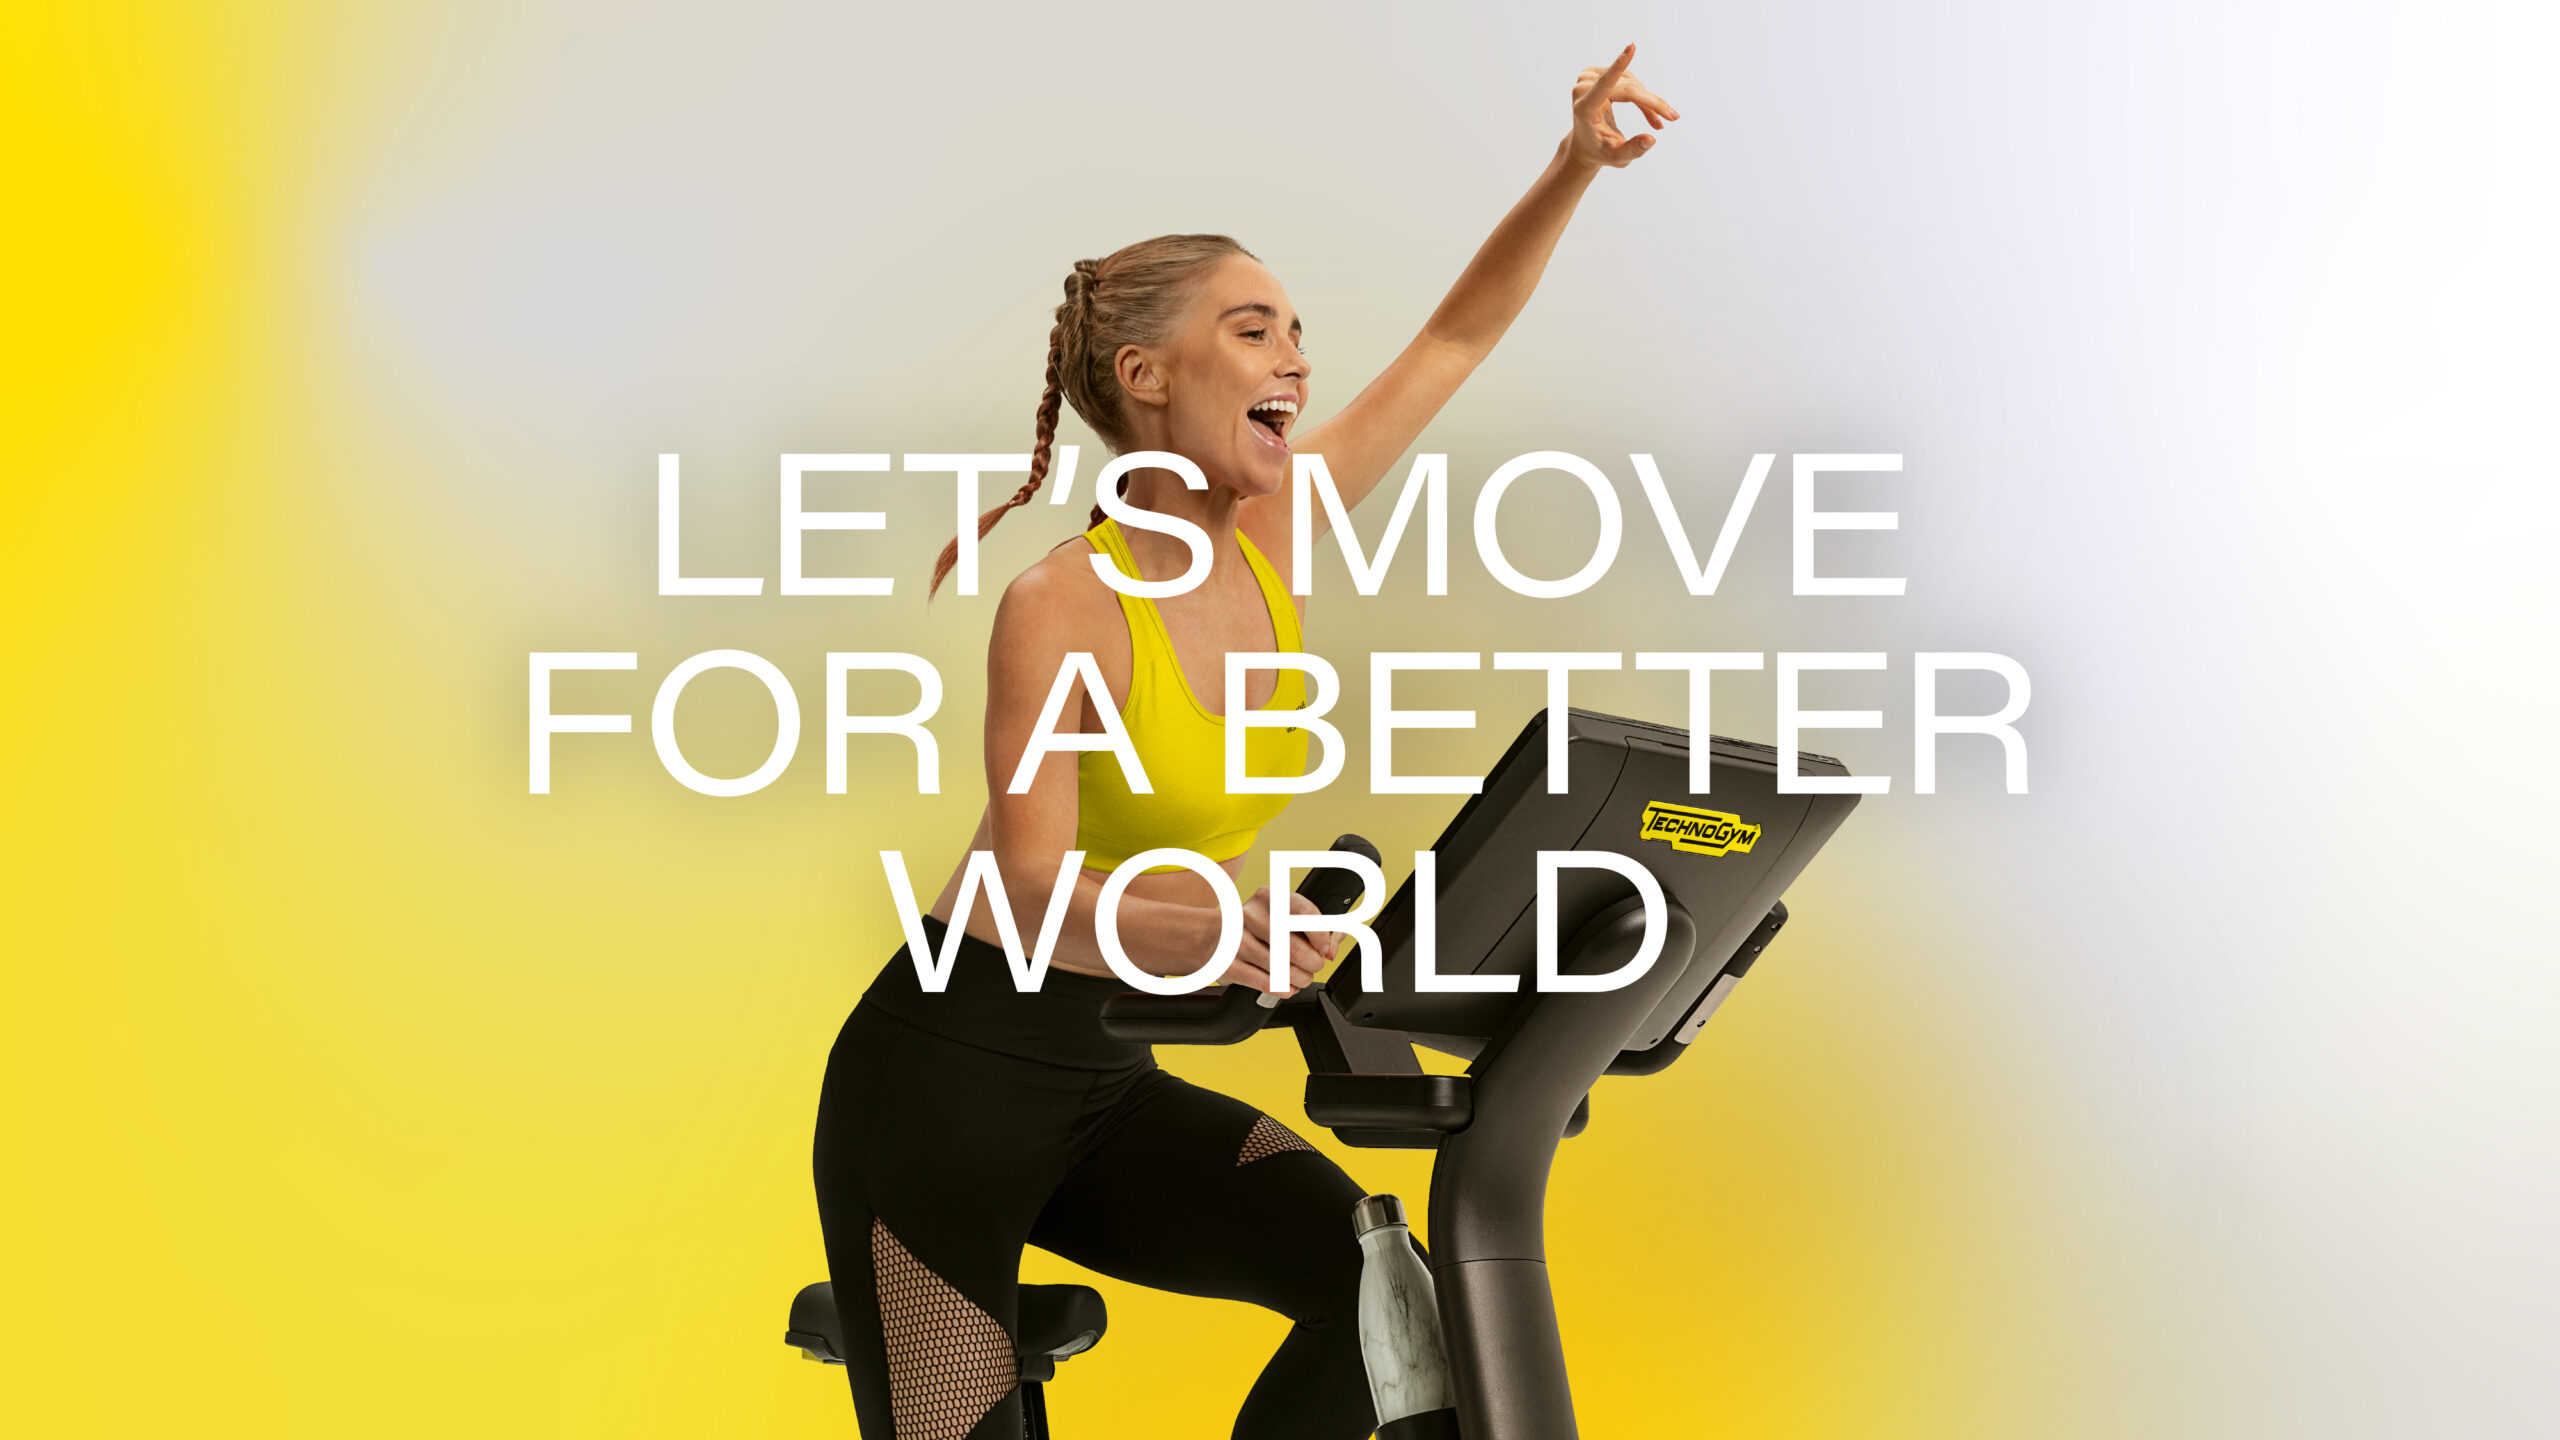 Let's move for a better world